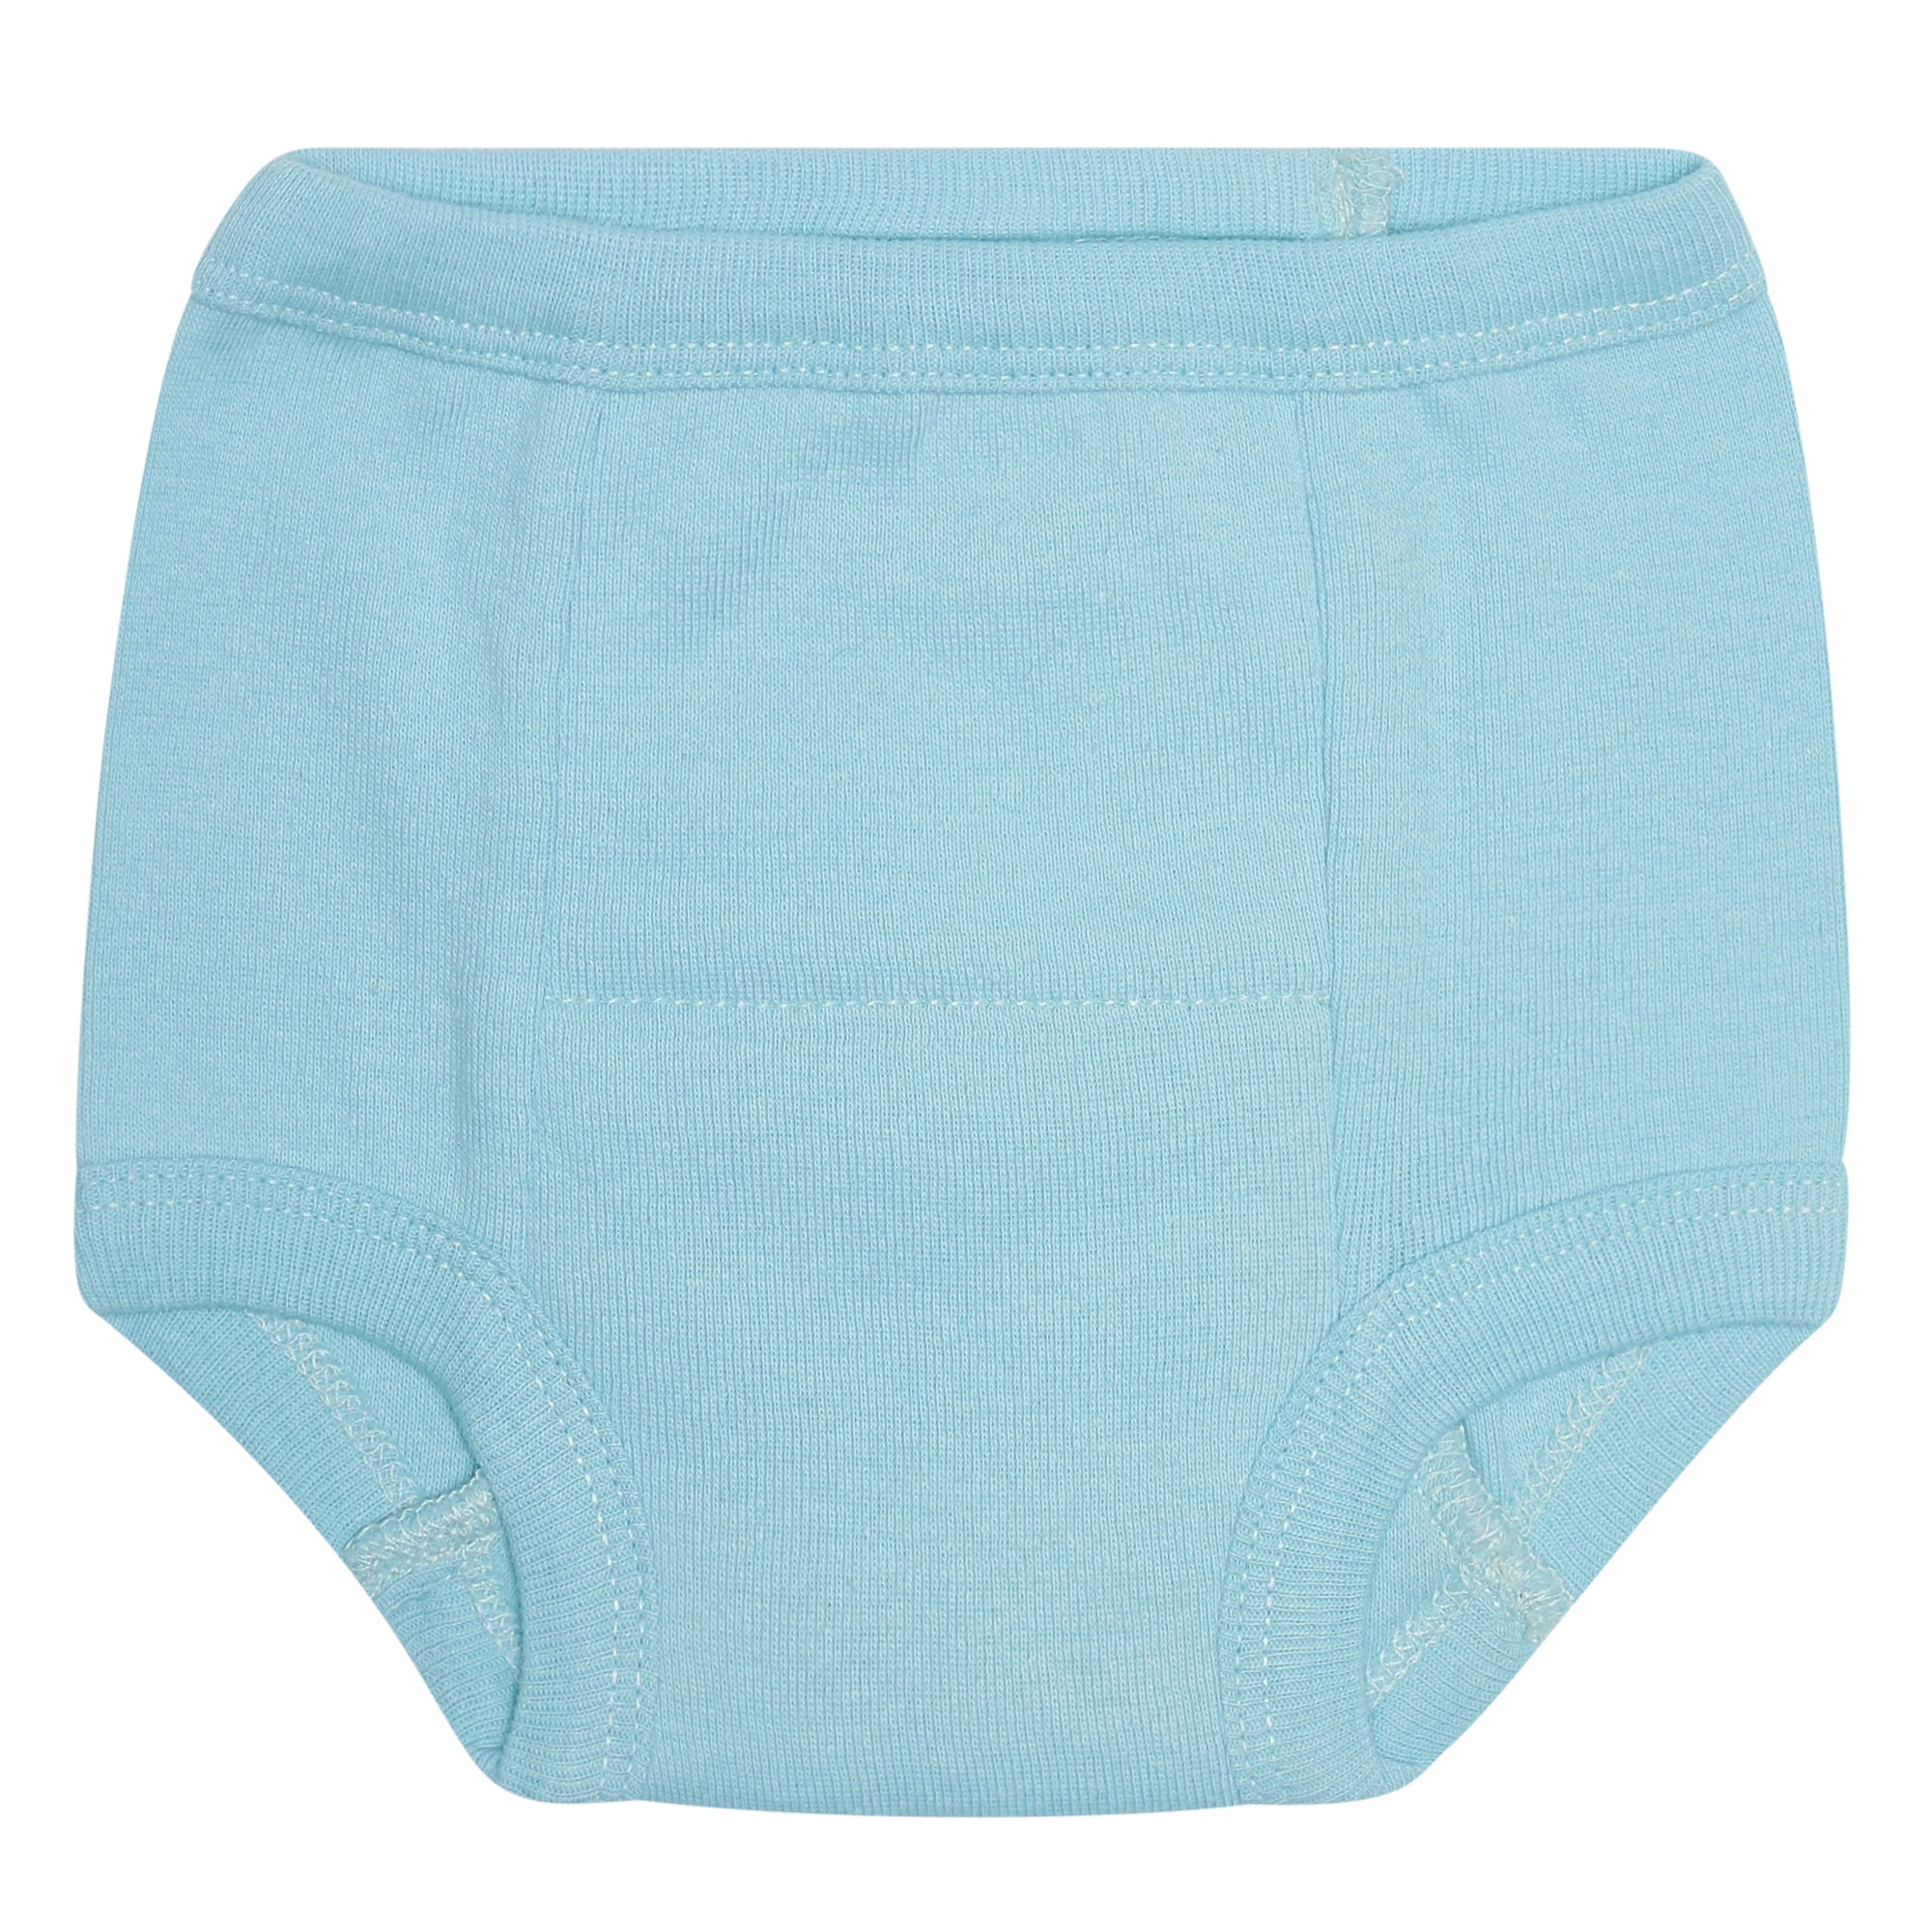 Potty Training Underwear Pants Cotton Absorbent for Toddler 3t